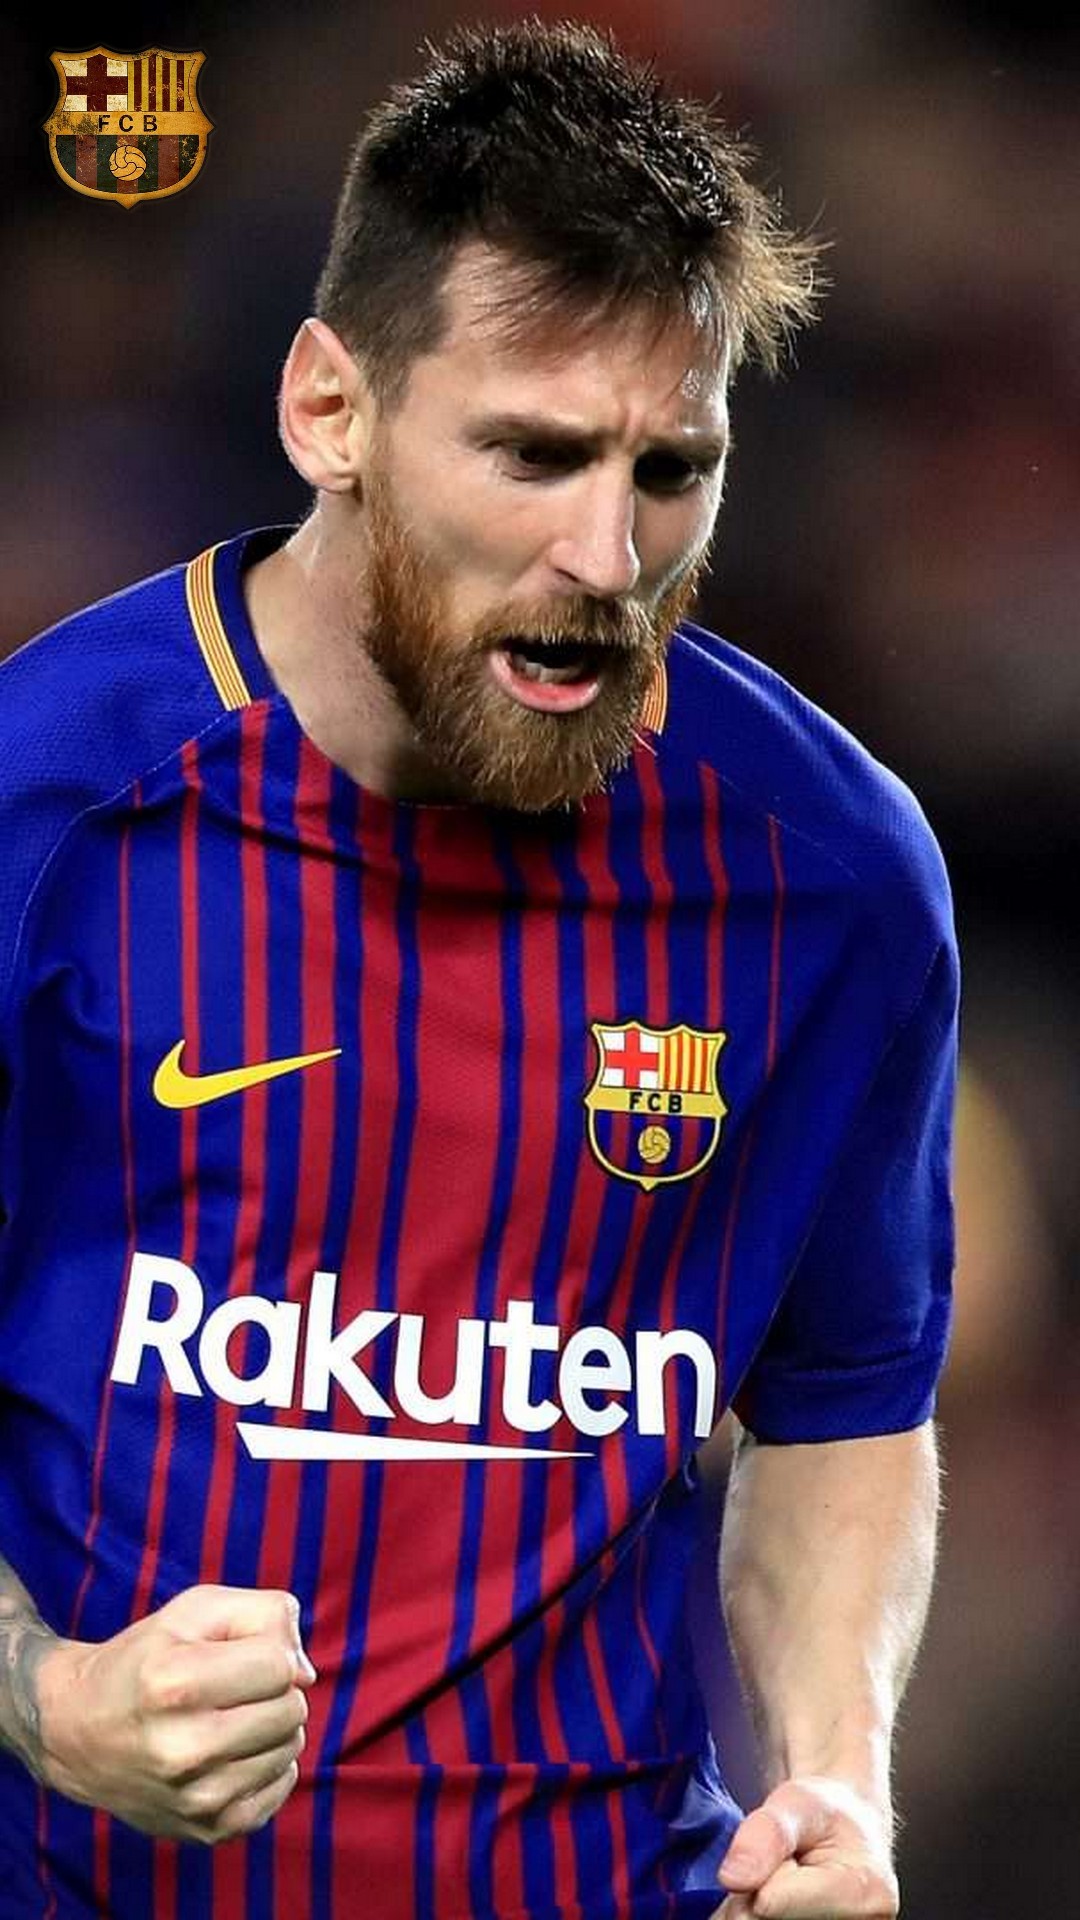 Lionel Messi HD Wallpaper For iPhone With Resolution 1080X1920 pixel. You can make this wallpaper for your Mac or Windows Desktop Background, iPhone, Android or Tablet and another Smartphone device for free